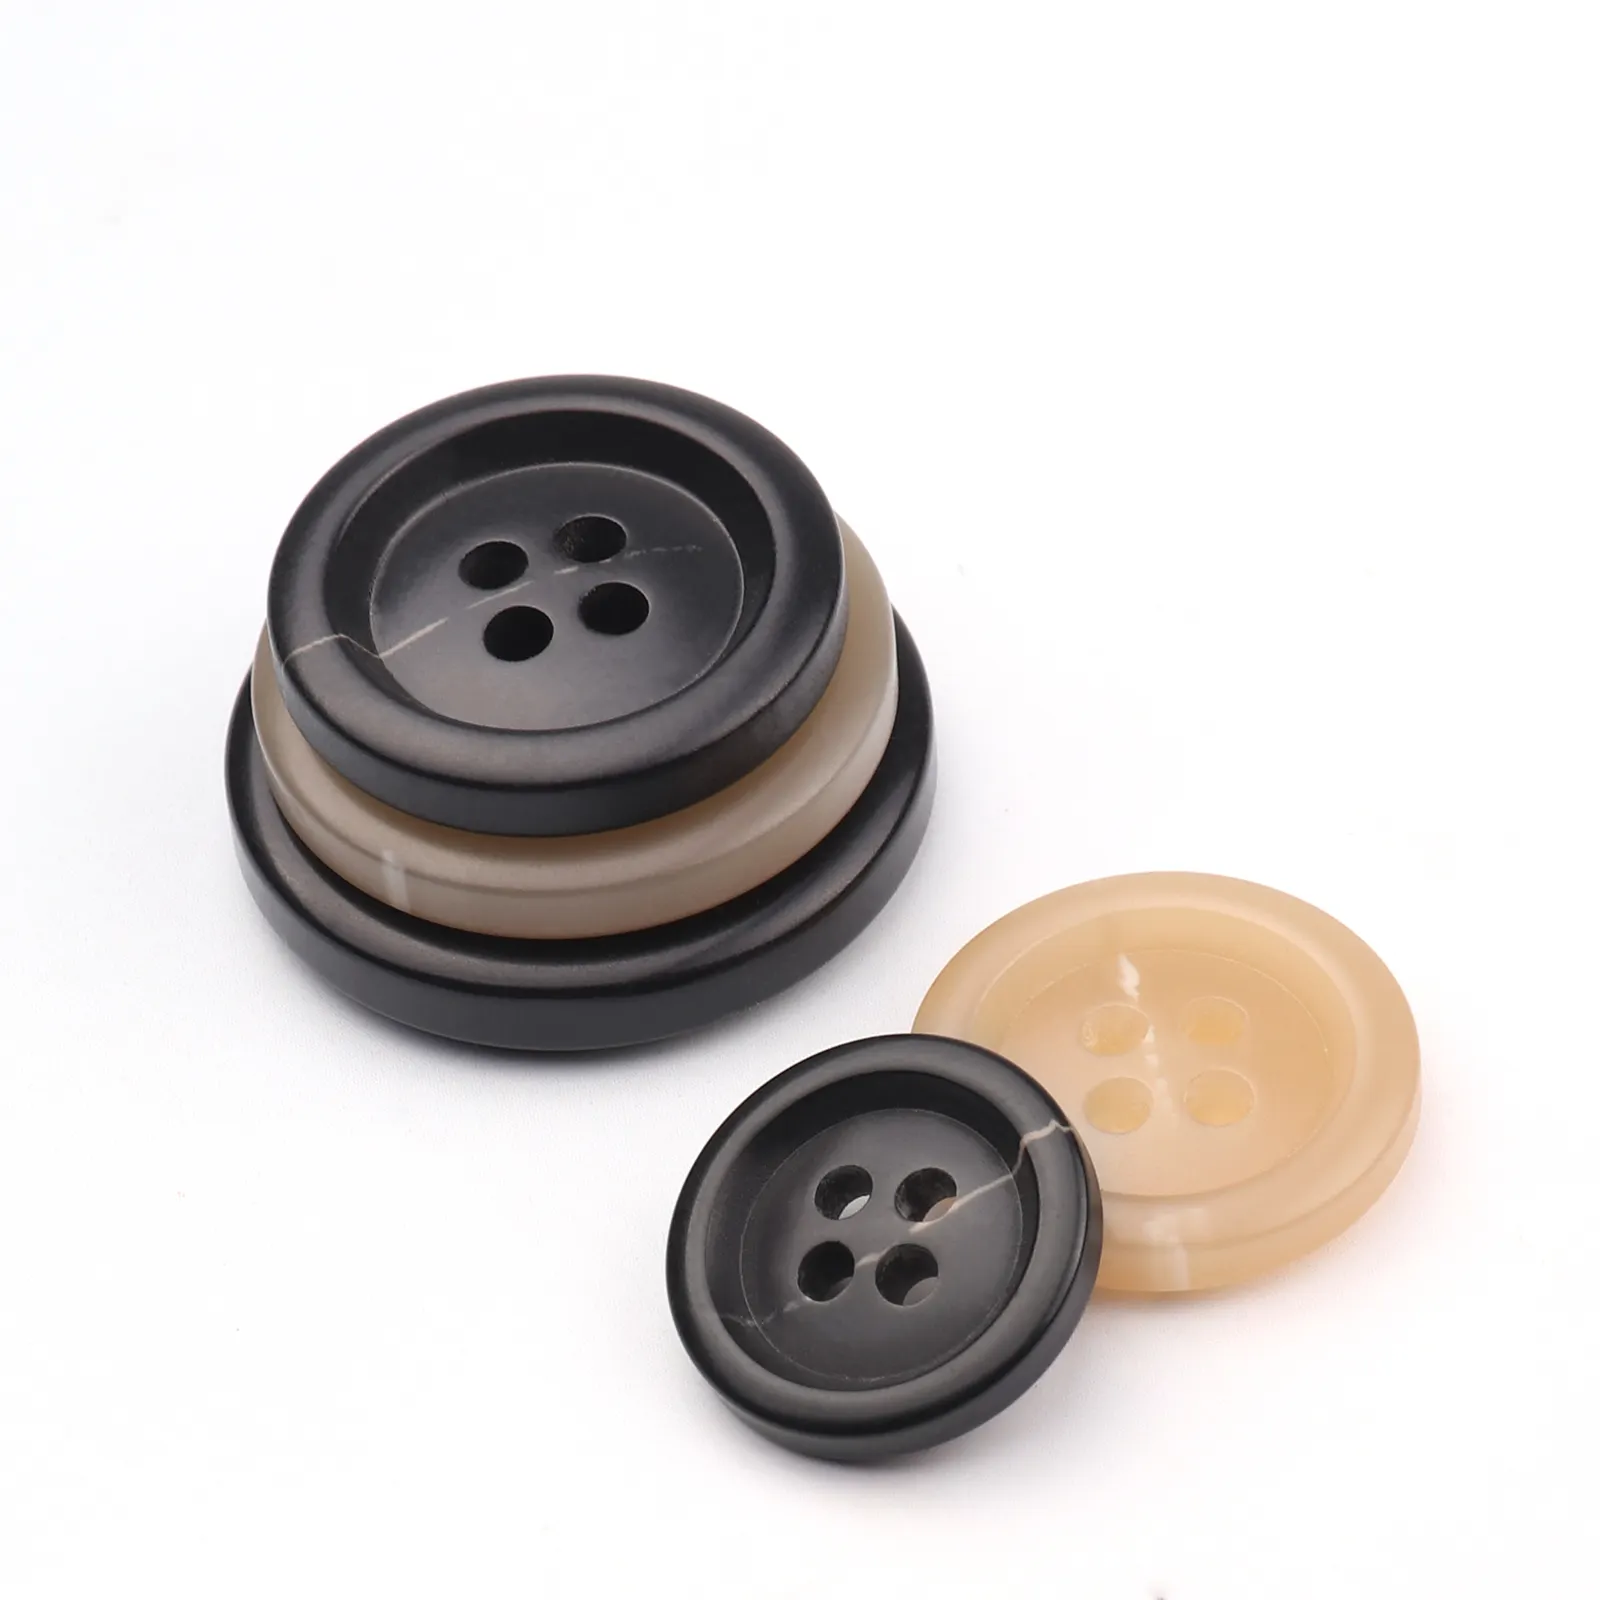 Mailida Resin Plastic Button Wholesale Thickening 4 - Eye Large Round Button Coat Trench Coat Button